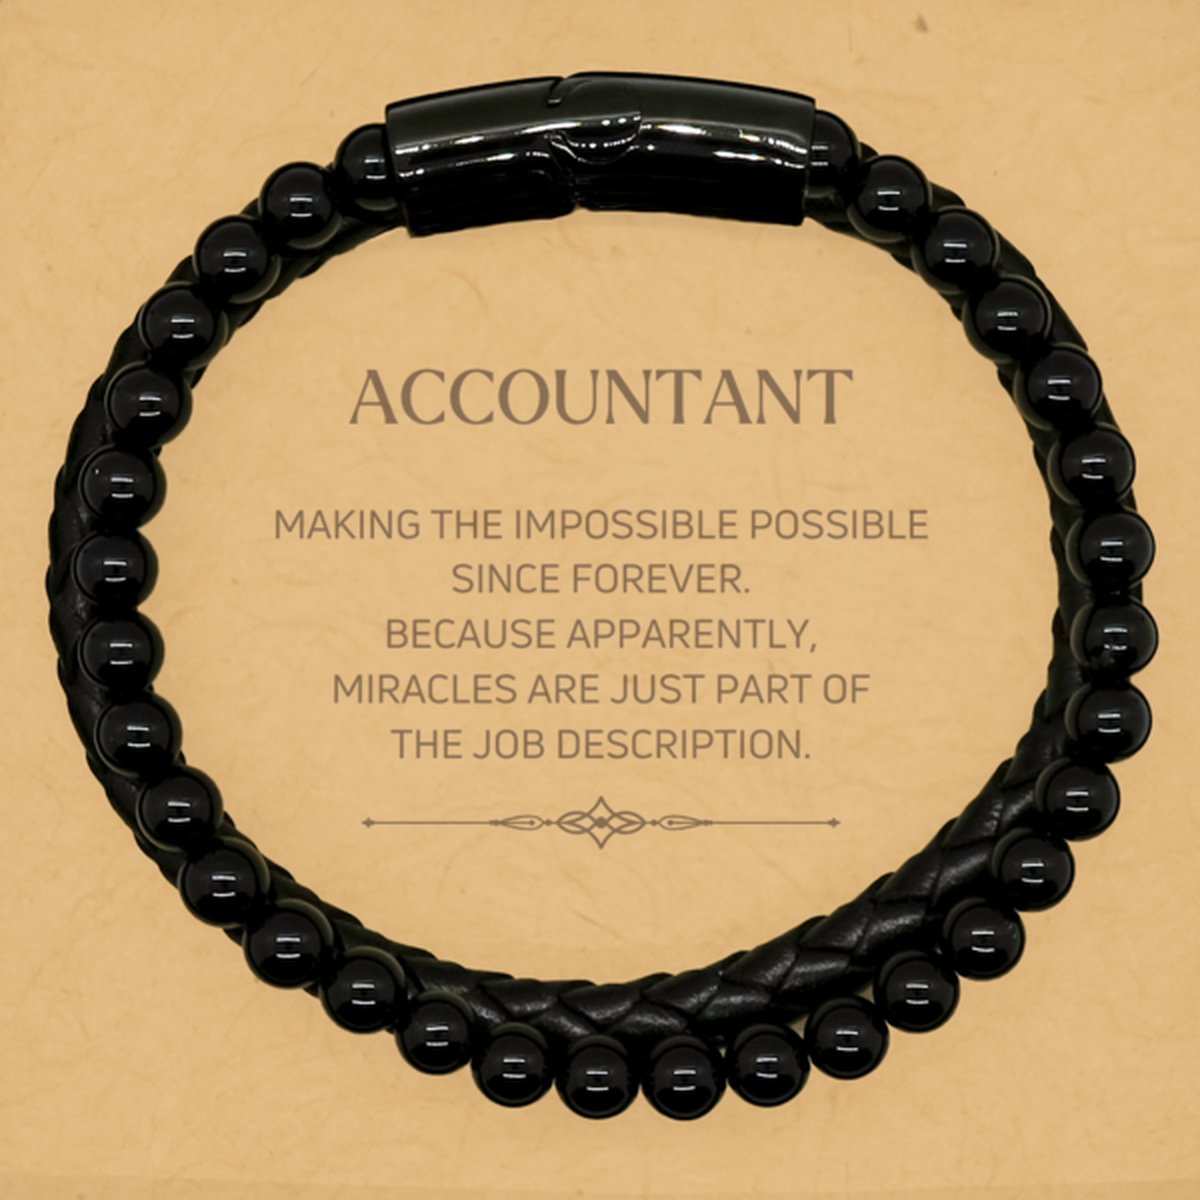 Funny Accountant Gifts, Miracles are just part of the job description, Inspirational Birthday Stone Leather Bracelets For Accountant, Men, Women, Coworkers, Friends, Boss